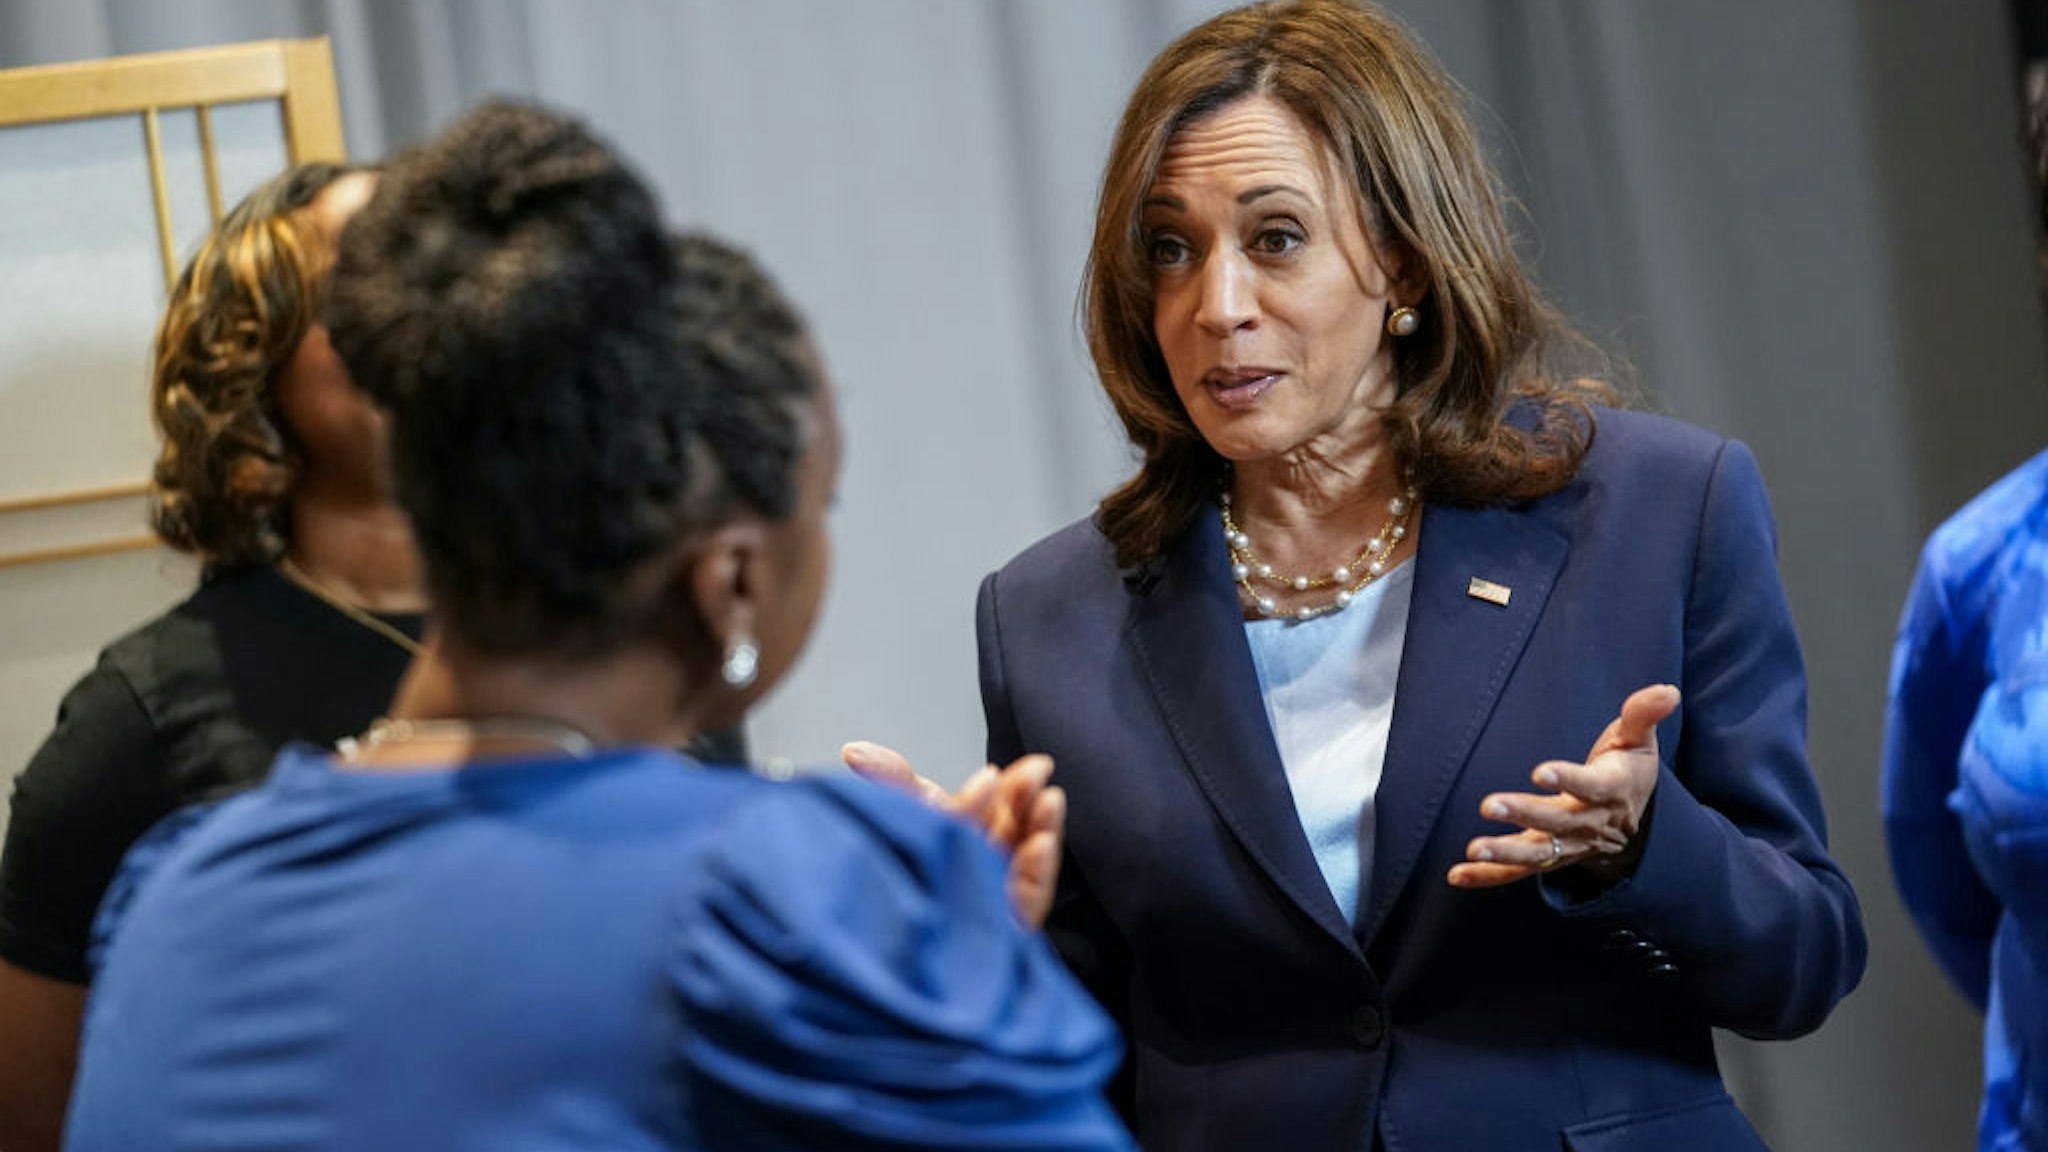 SAN FRANCISCO, CA - APRIL 21: Vice President Kamala Harris tours a facility at the University of California San Francisco Mission Bay for an event on Black Maternal Health on April 21, 2022 in San Francisco, CA.